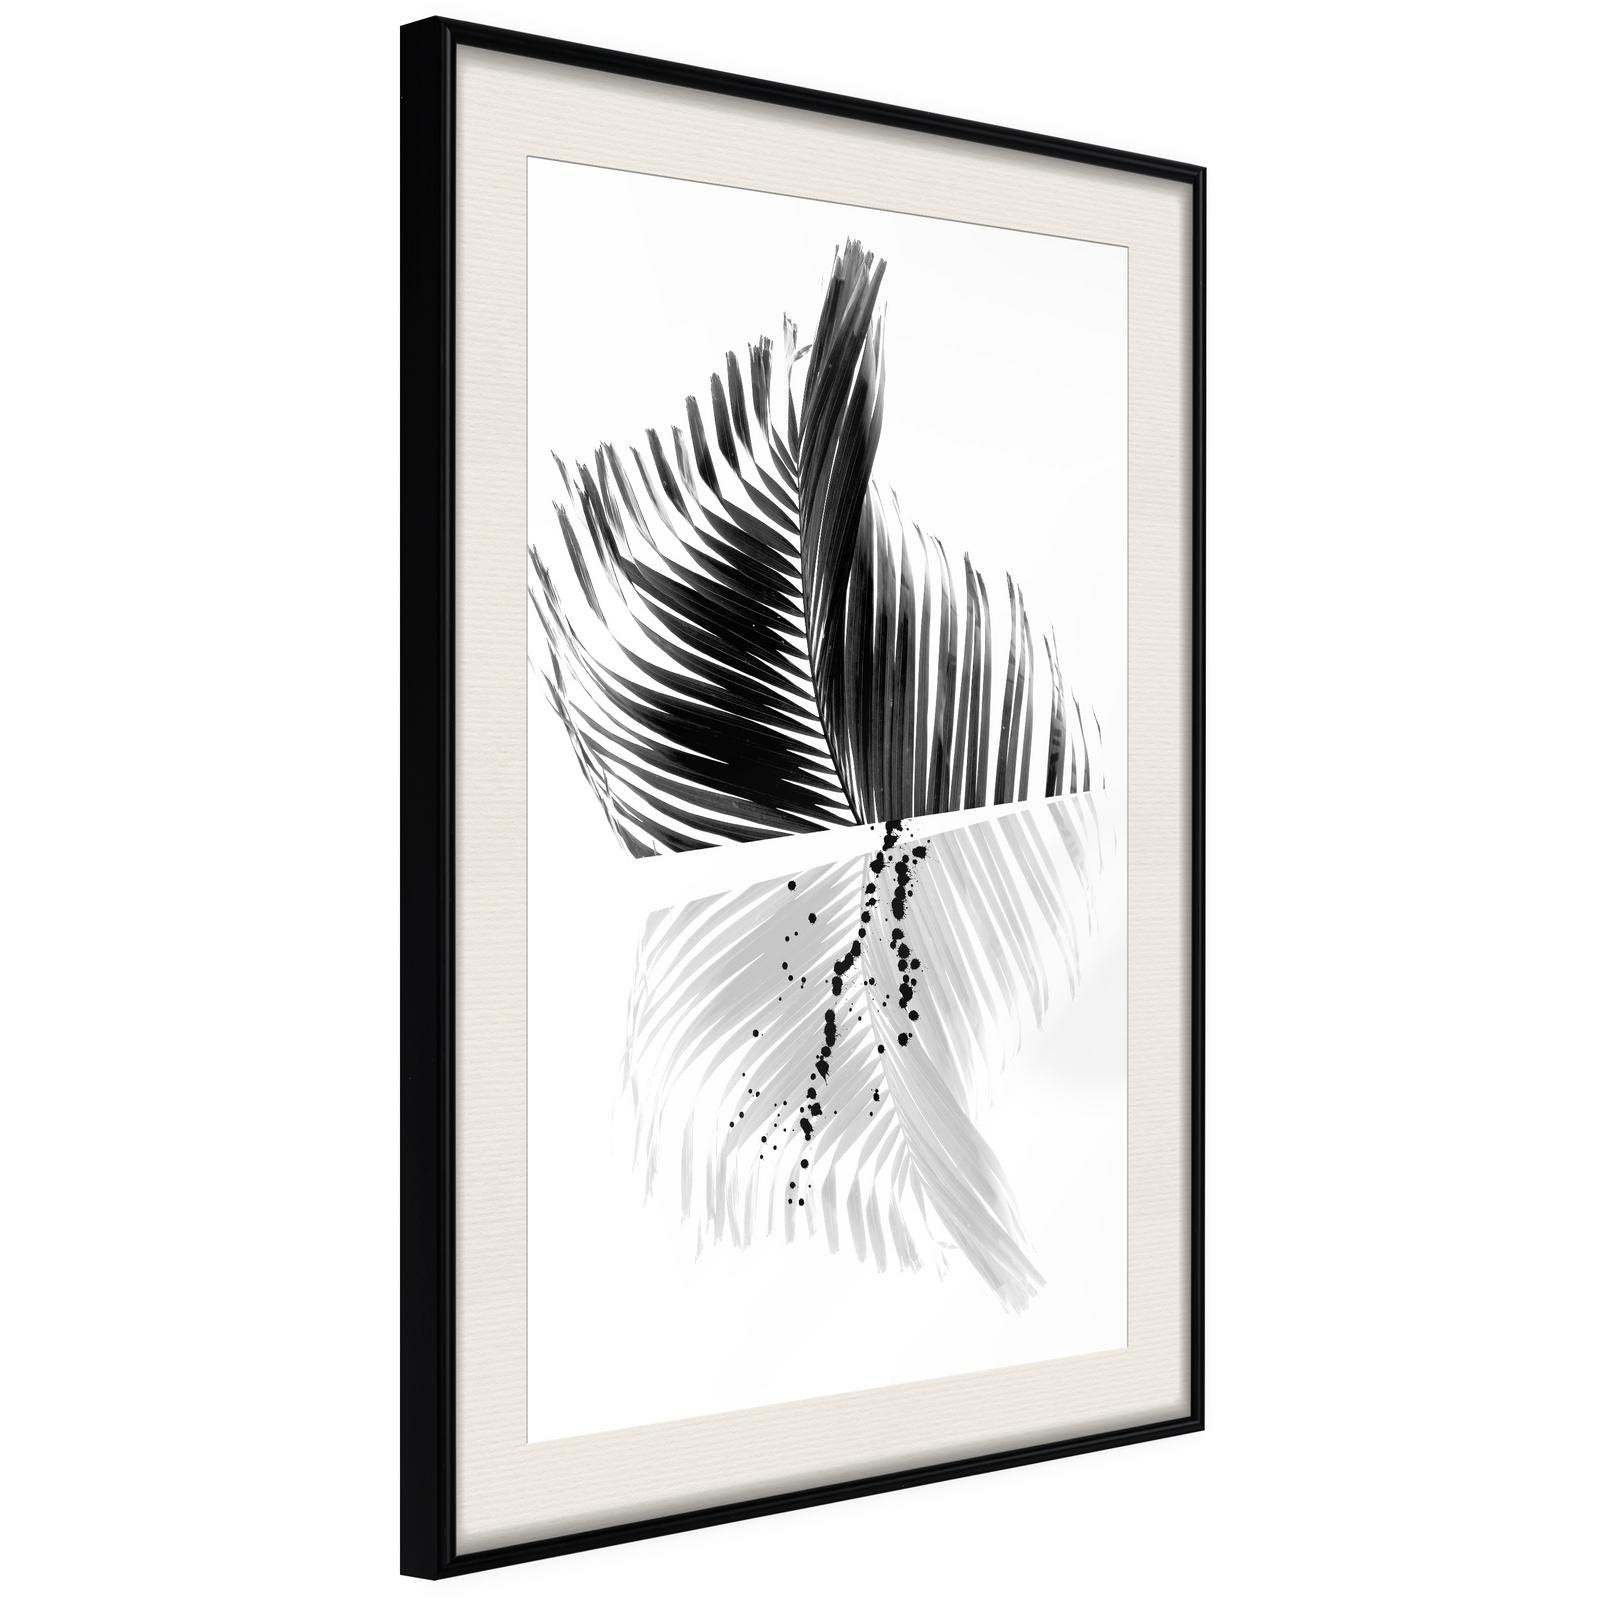 Inramad Poster / Tavla - Abstract Feather-Poster Inramad-Artgeist-20x30-Svart ram med passepartout-peaceofhome.se